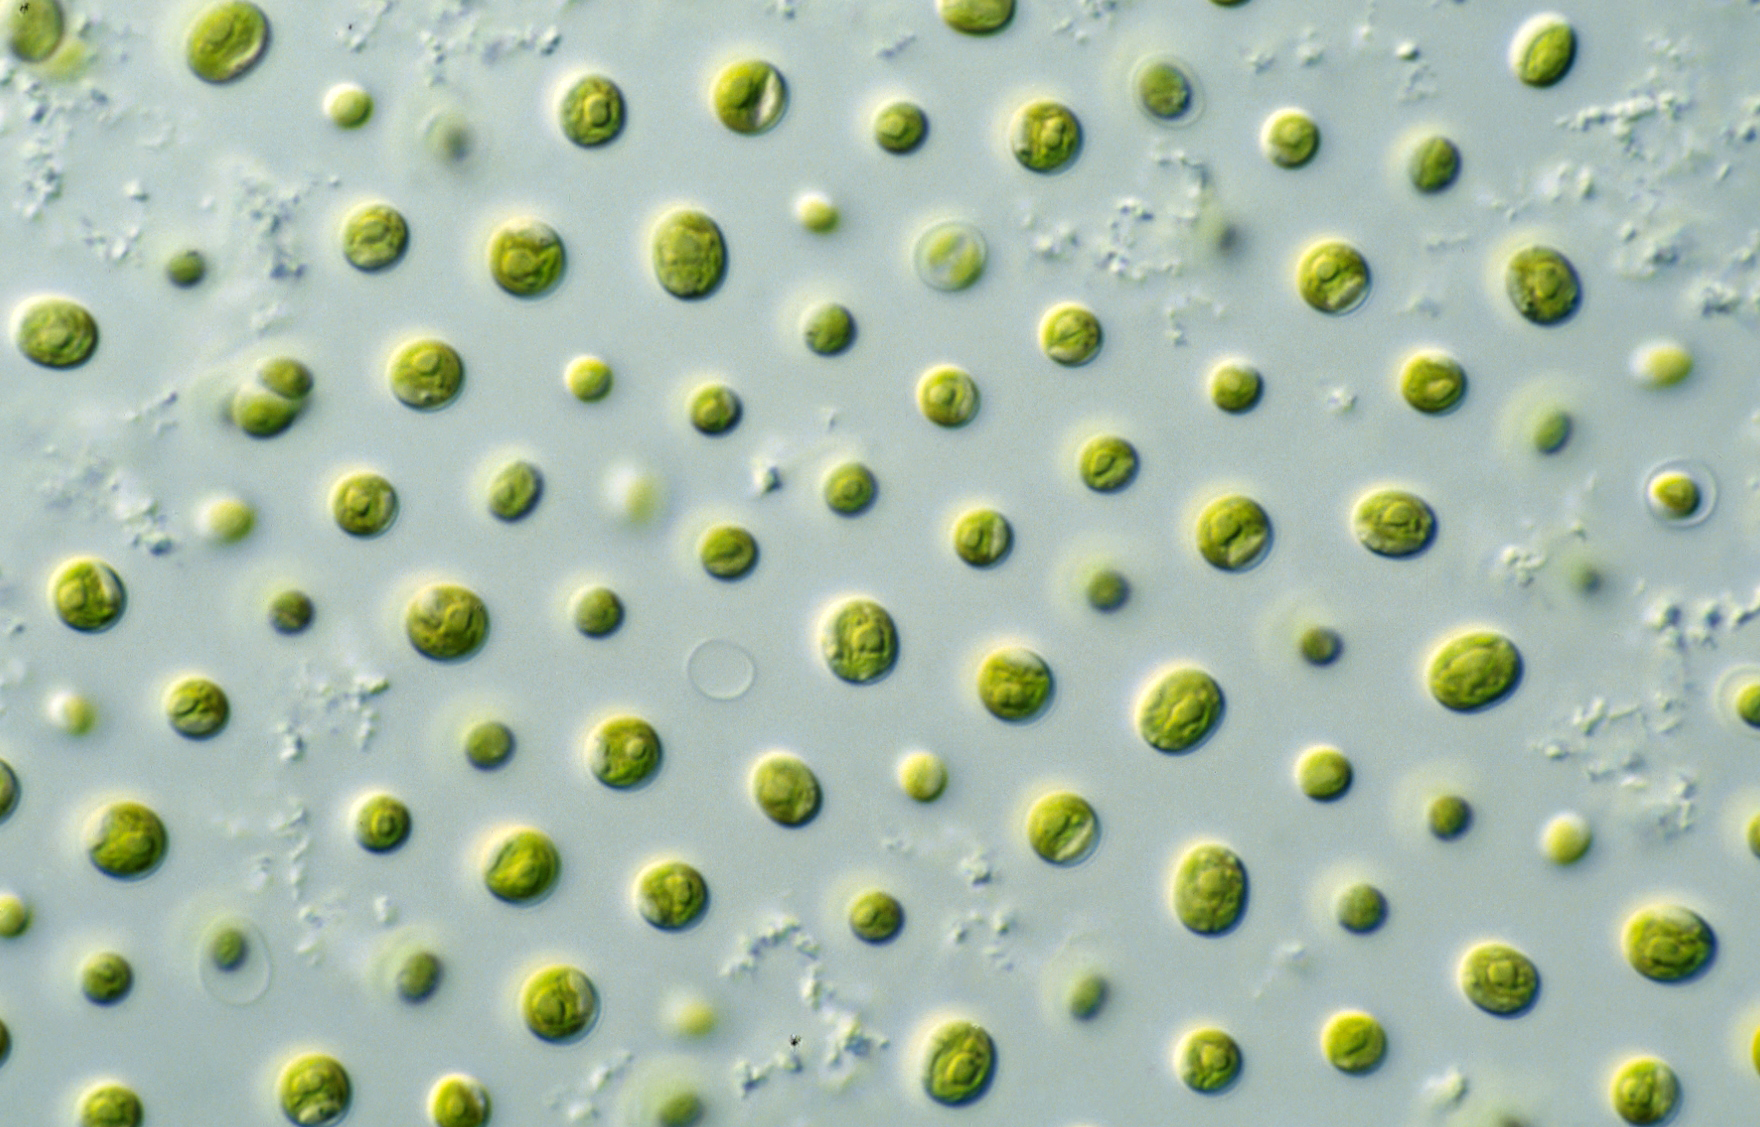 Microalgae Believes To Be The Future Of Sustainable Superfoods